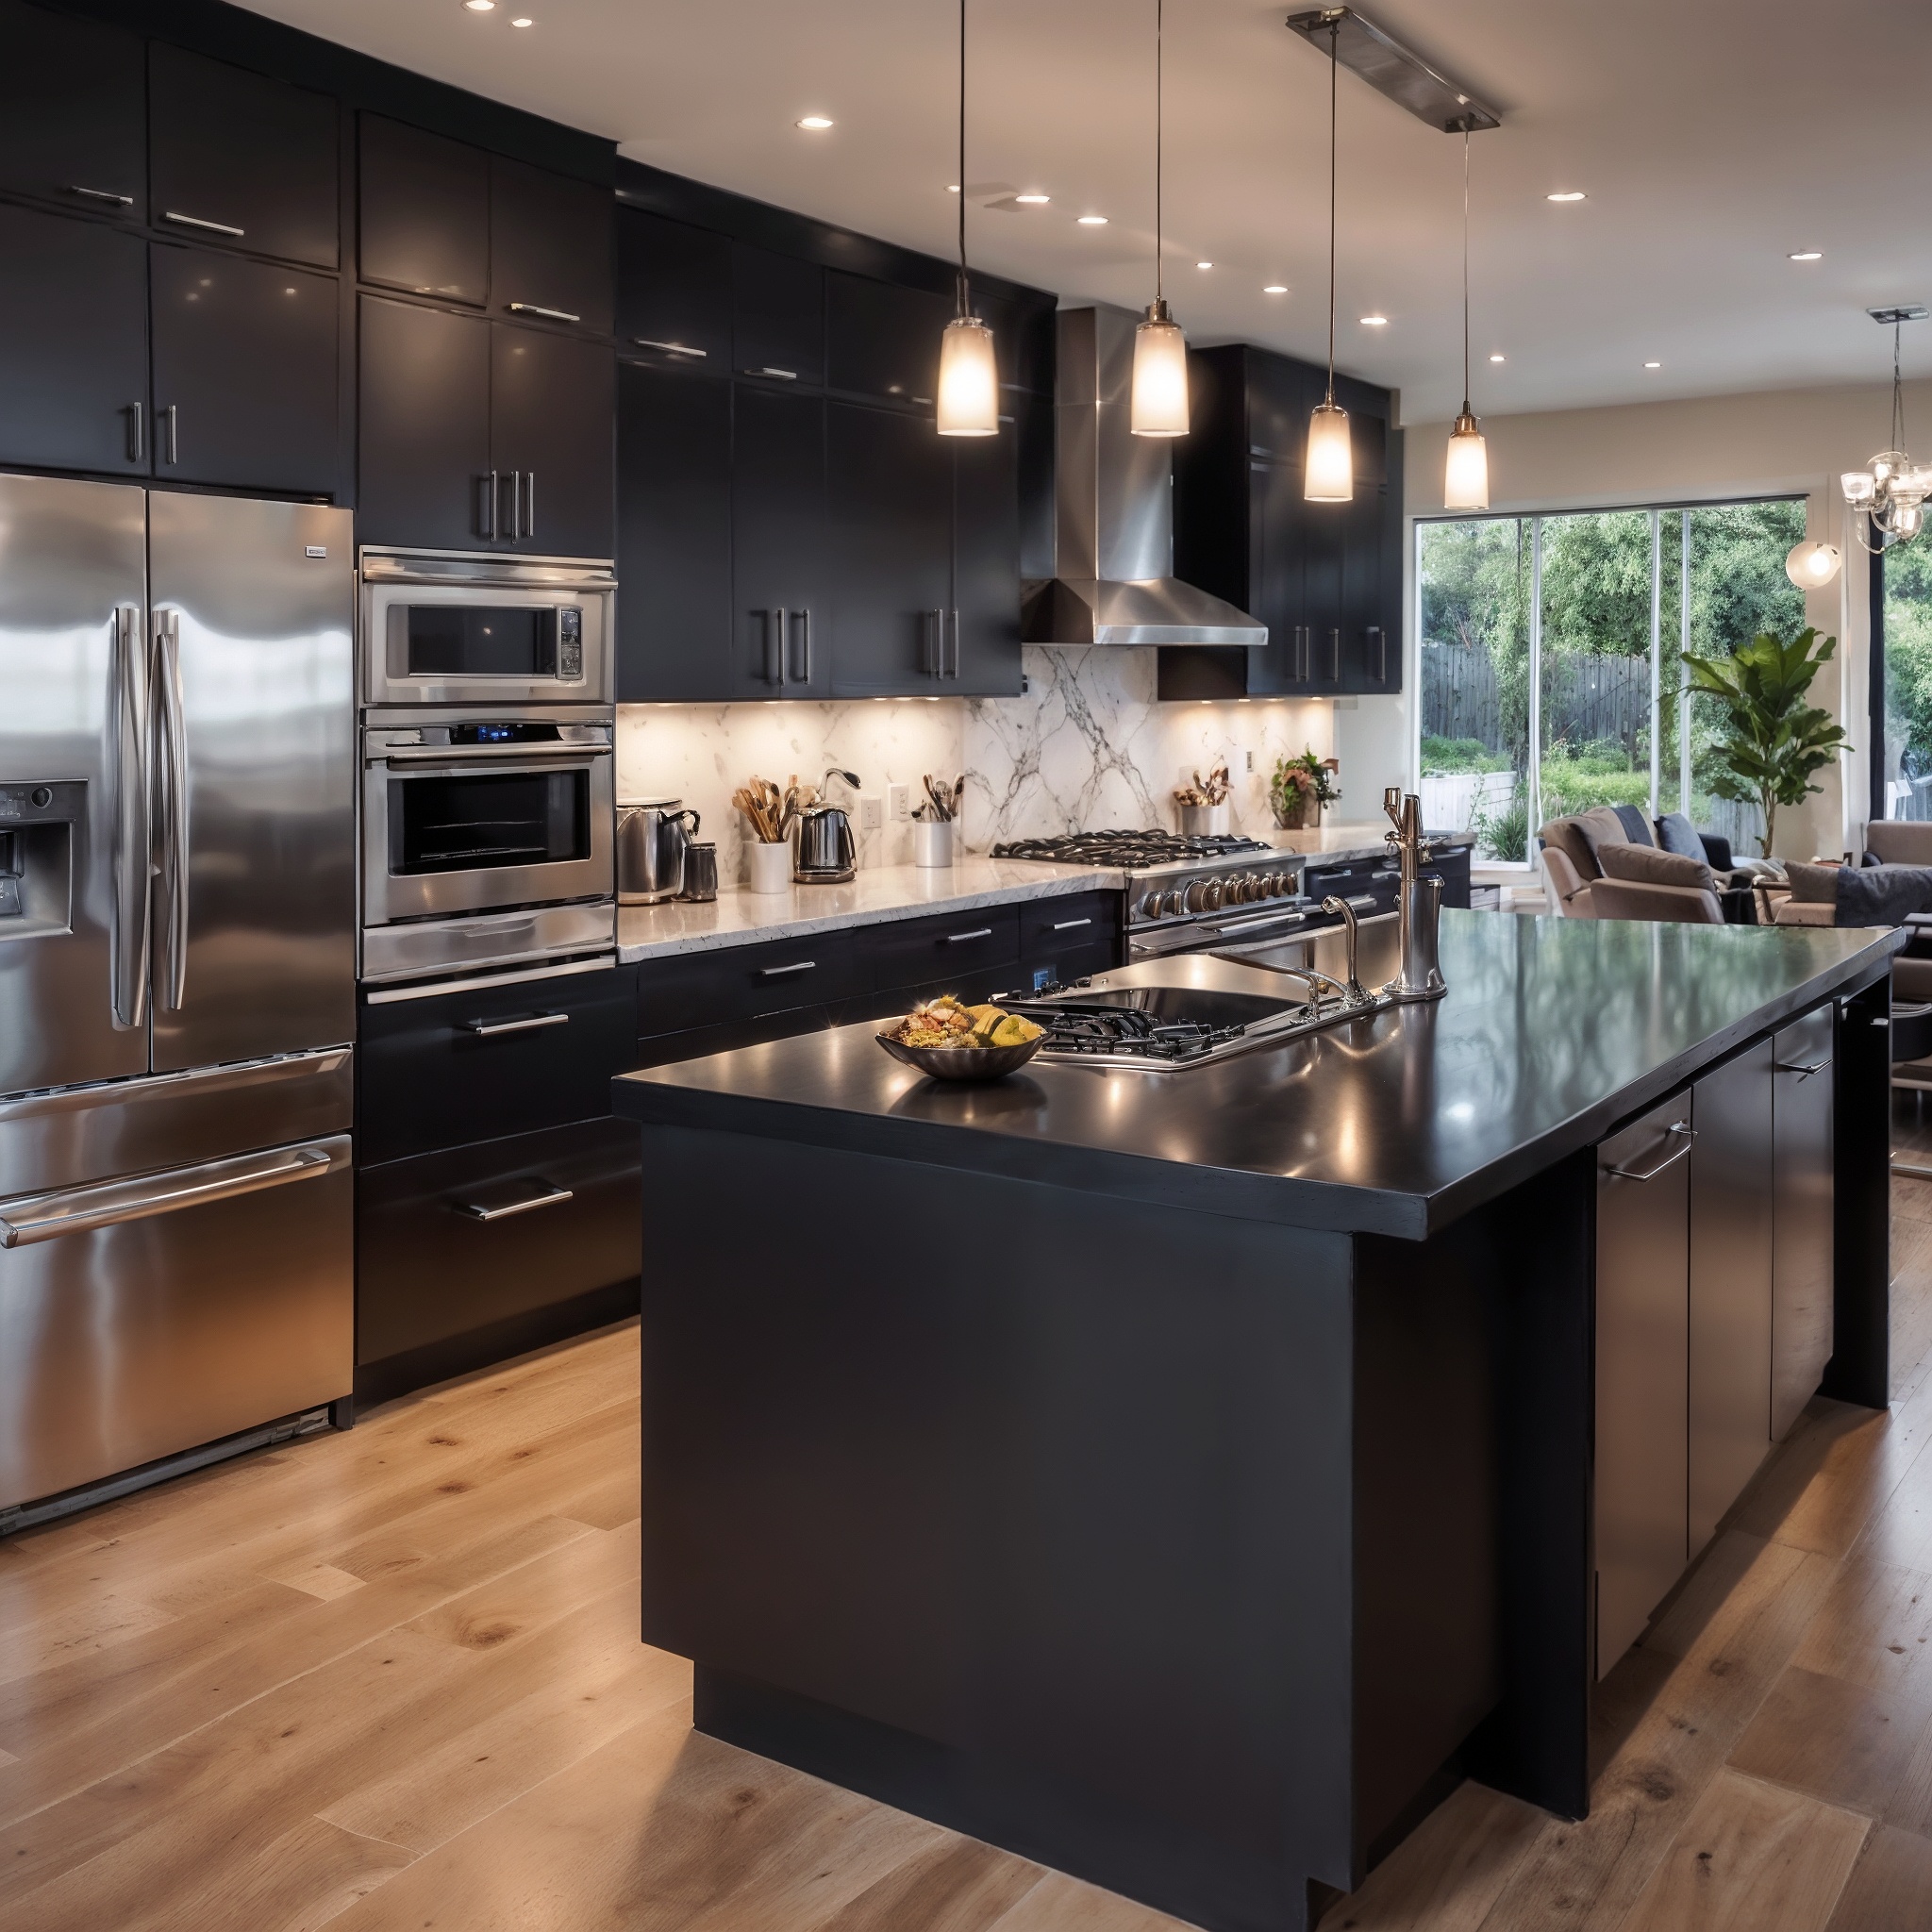 Contemporary Kitchen Layout With Glossy Black Cabinets, Quartz Countertops, Stainless Steel Appliances, Large Kitchen Island